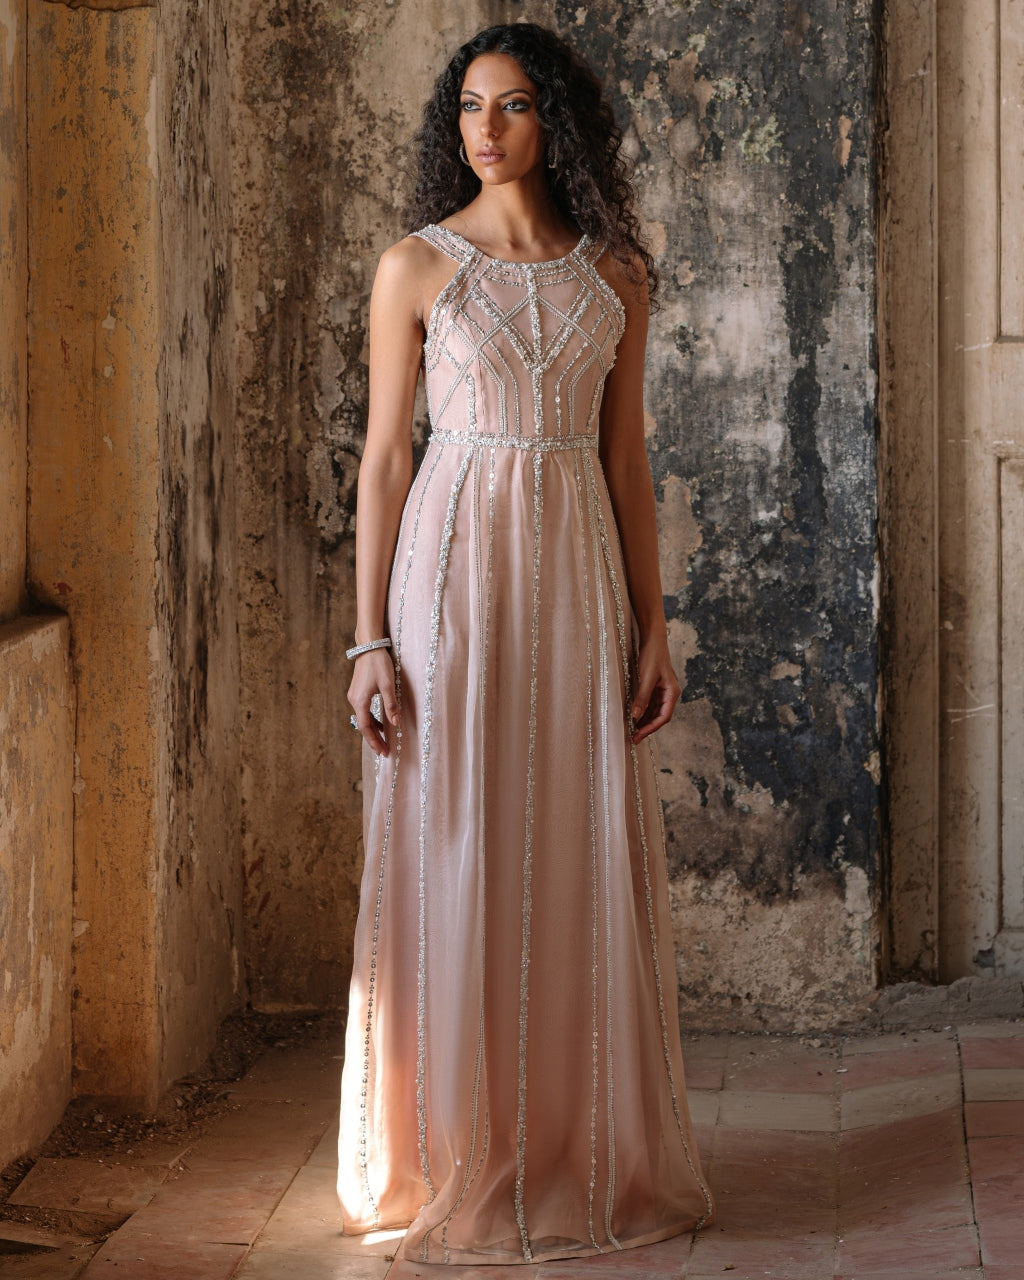 Nude-Pink Sleek And Fluid Gown